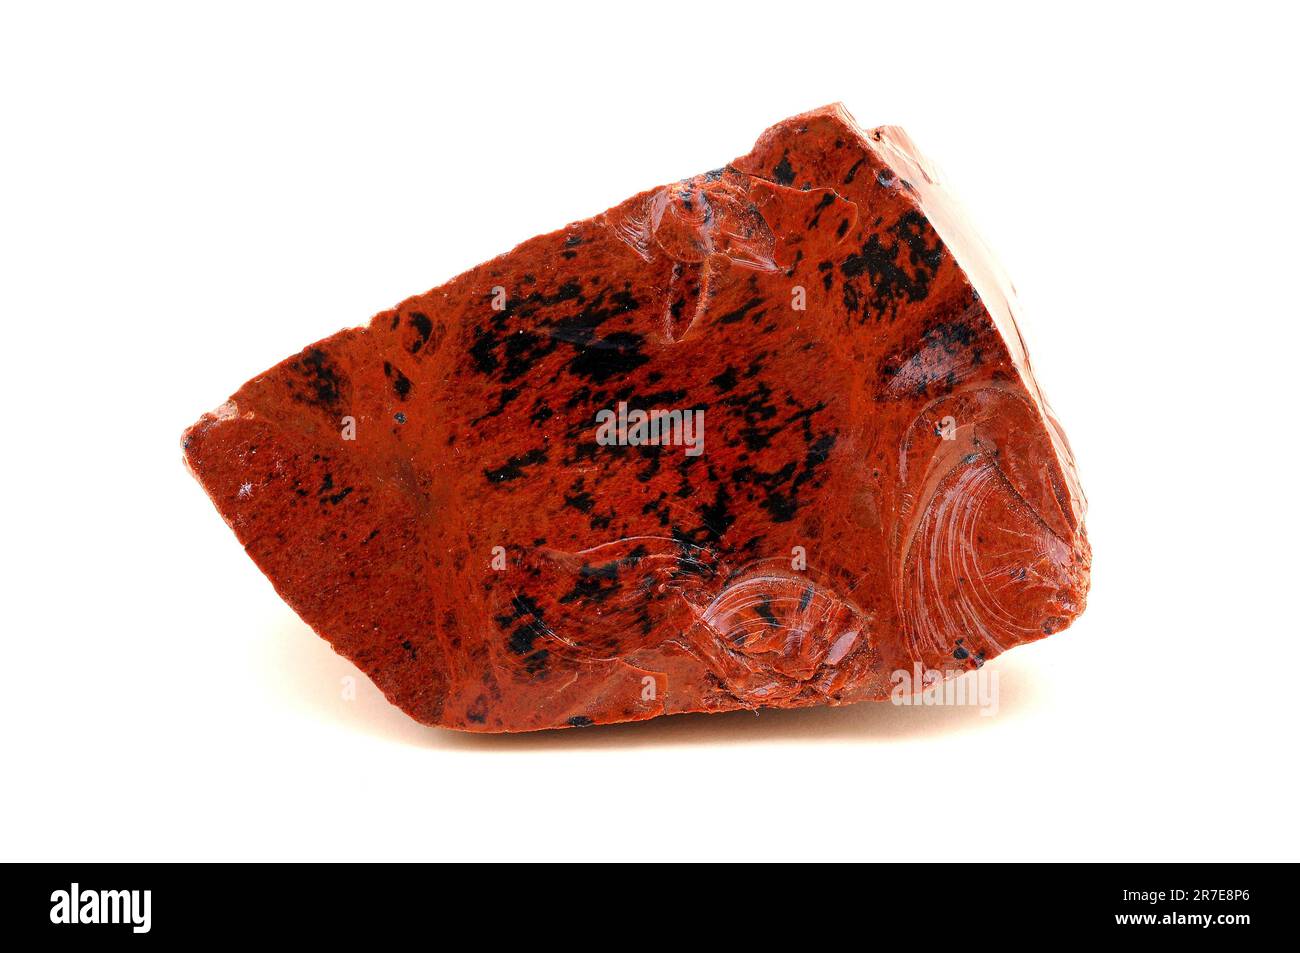 Mahogany obsidian sample. The obsidian is a volcanic glass formed as an extrusive igneous rock. Mexico Stock Photo